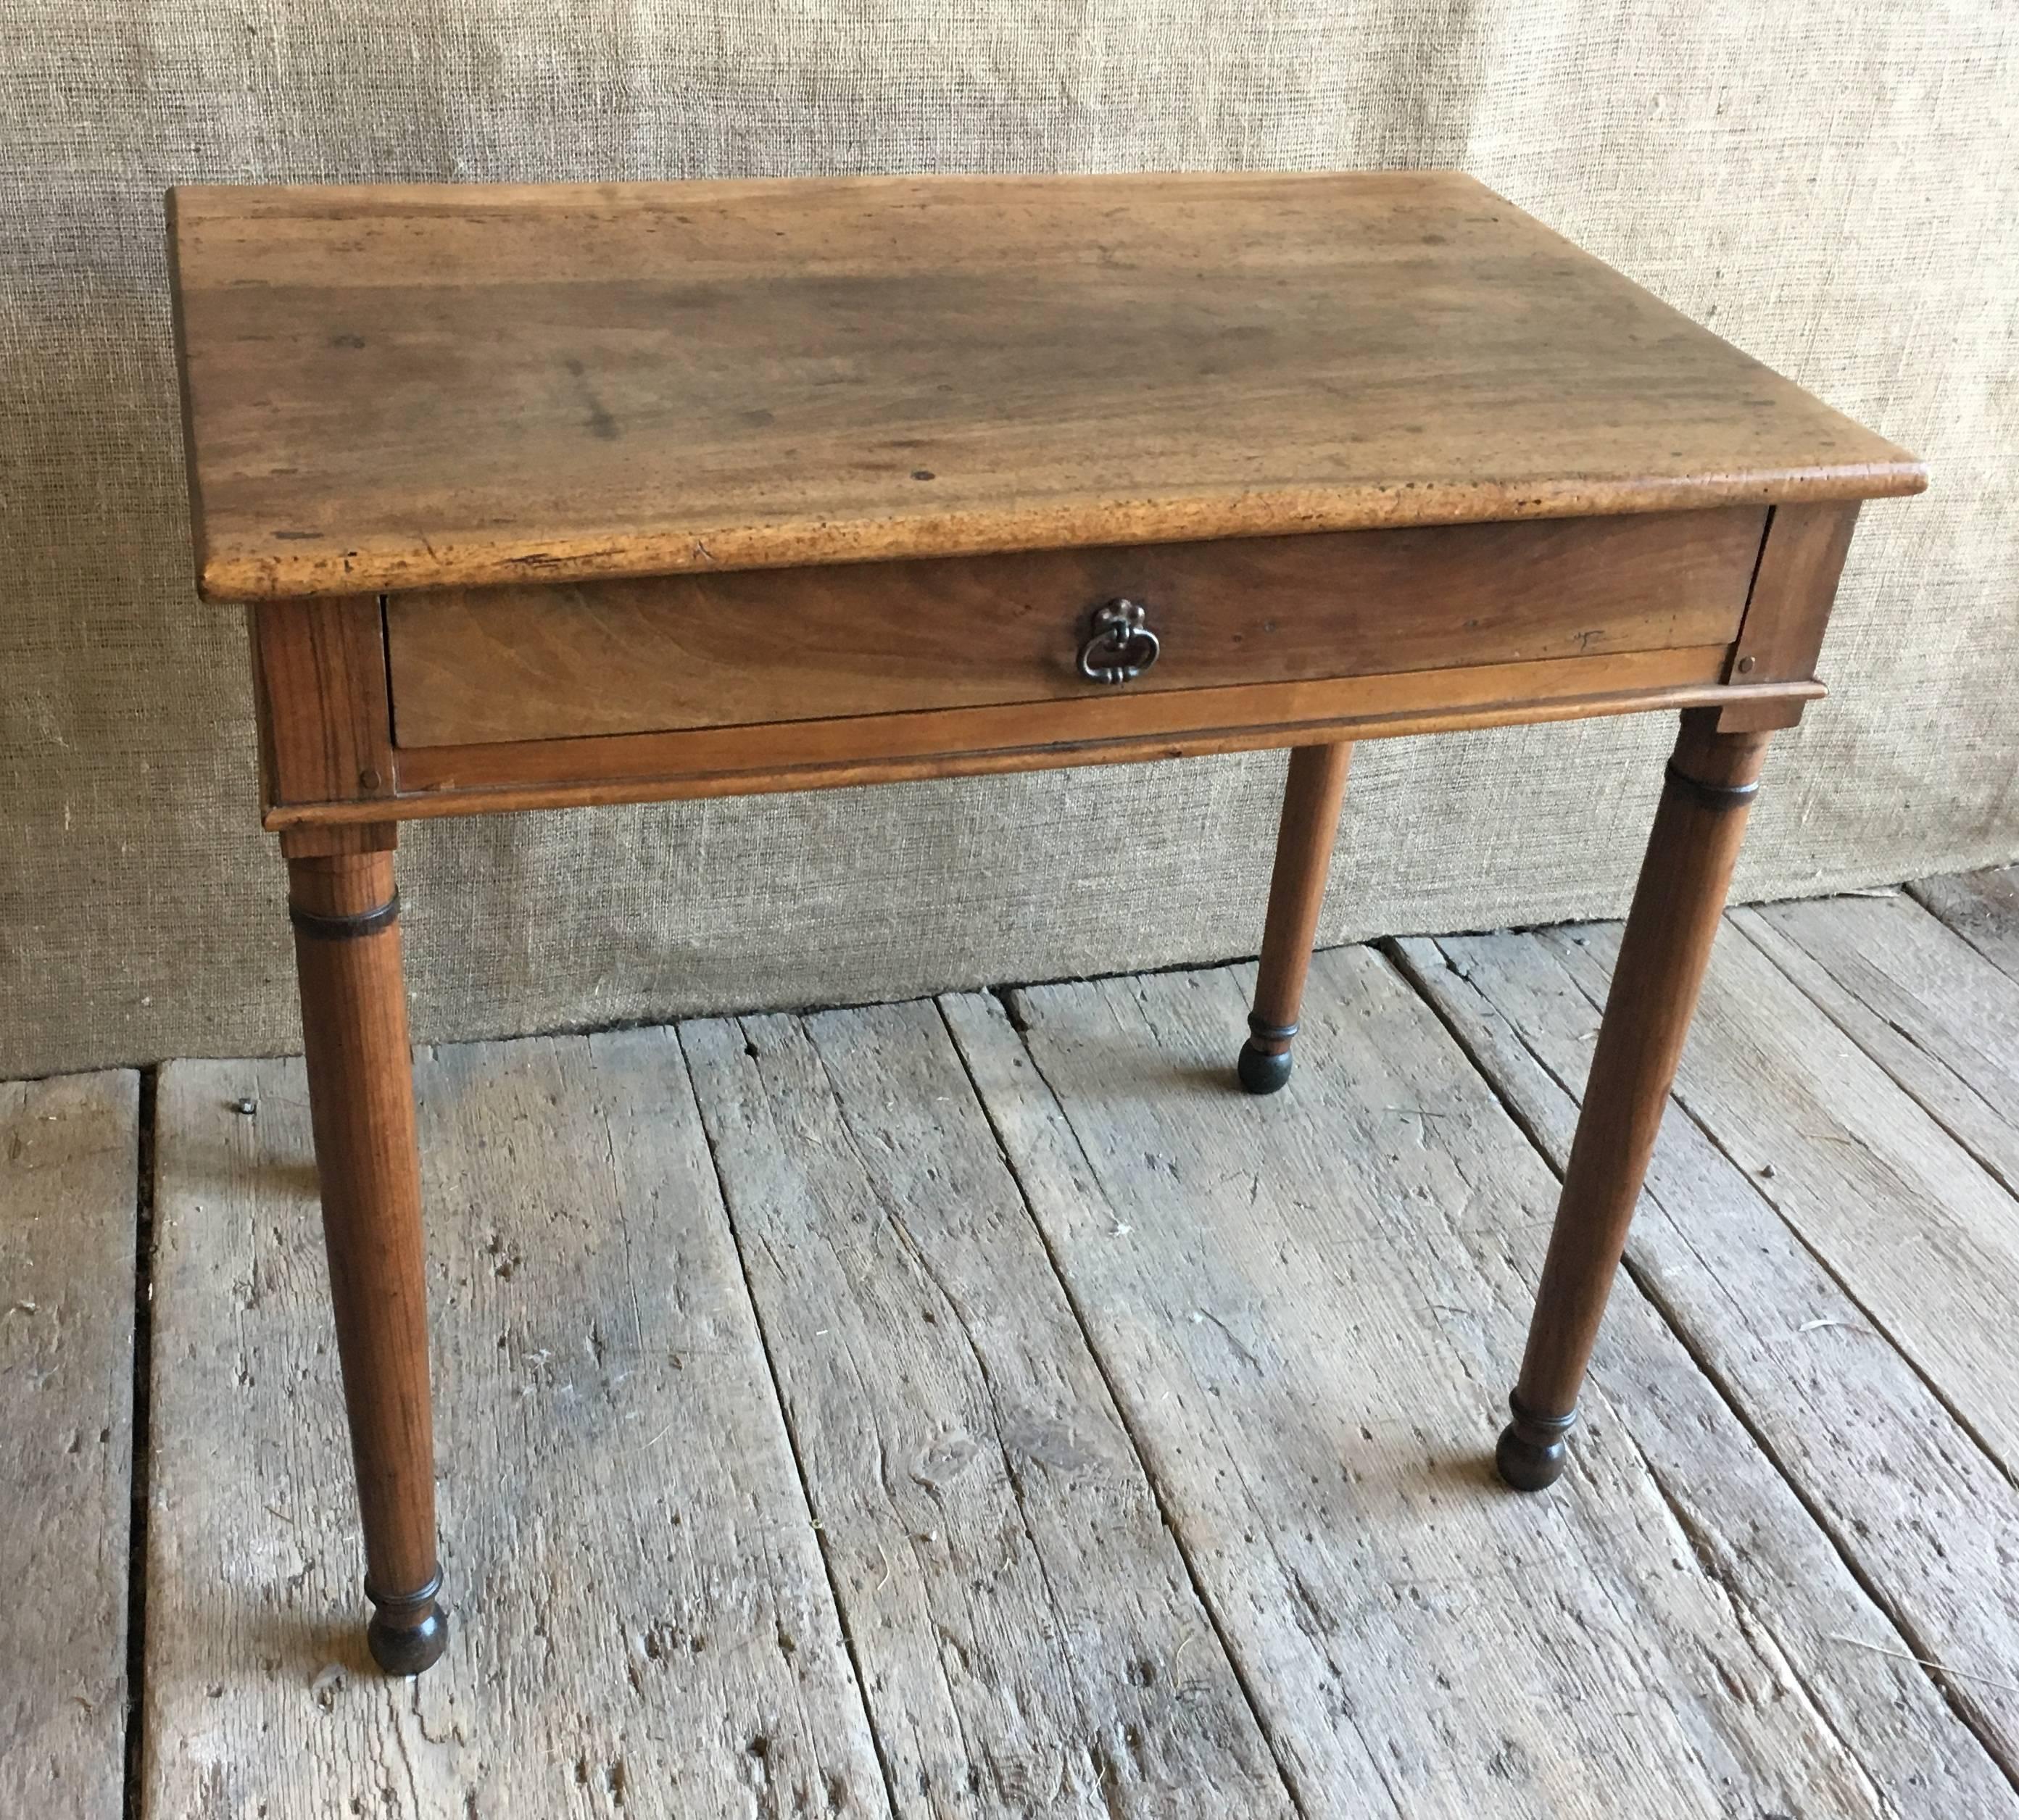 A nice French Directoire side or writing table in walnut, circa 1800, with a long drawer and turned legs with ebonized details. Finished on all sides.